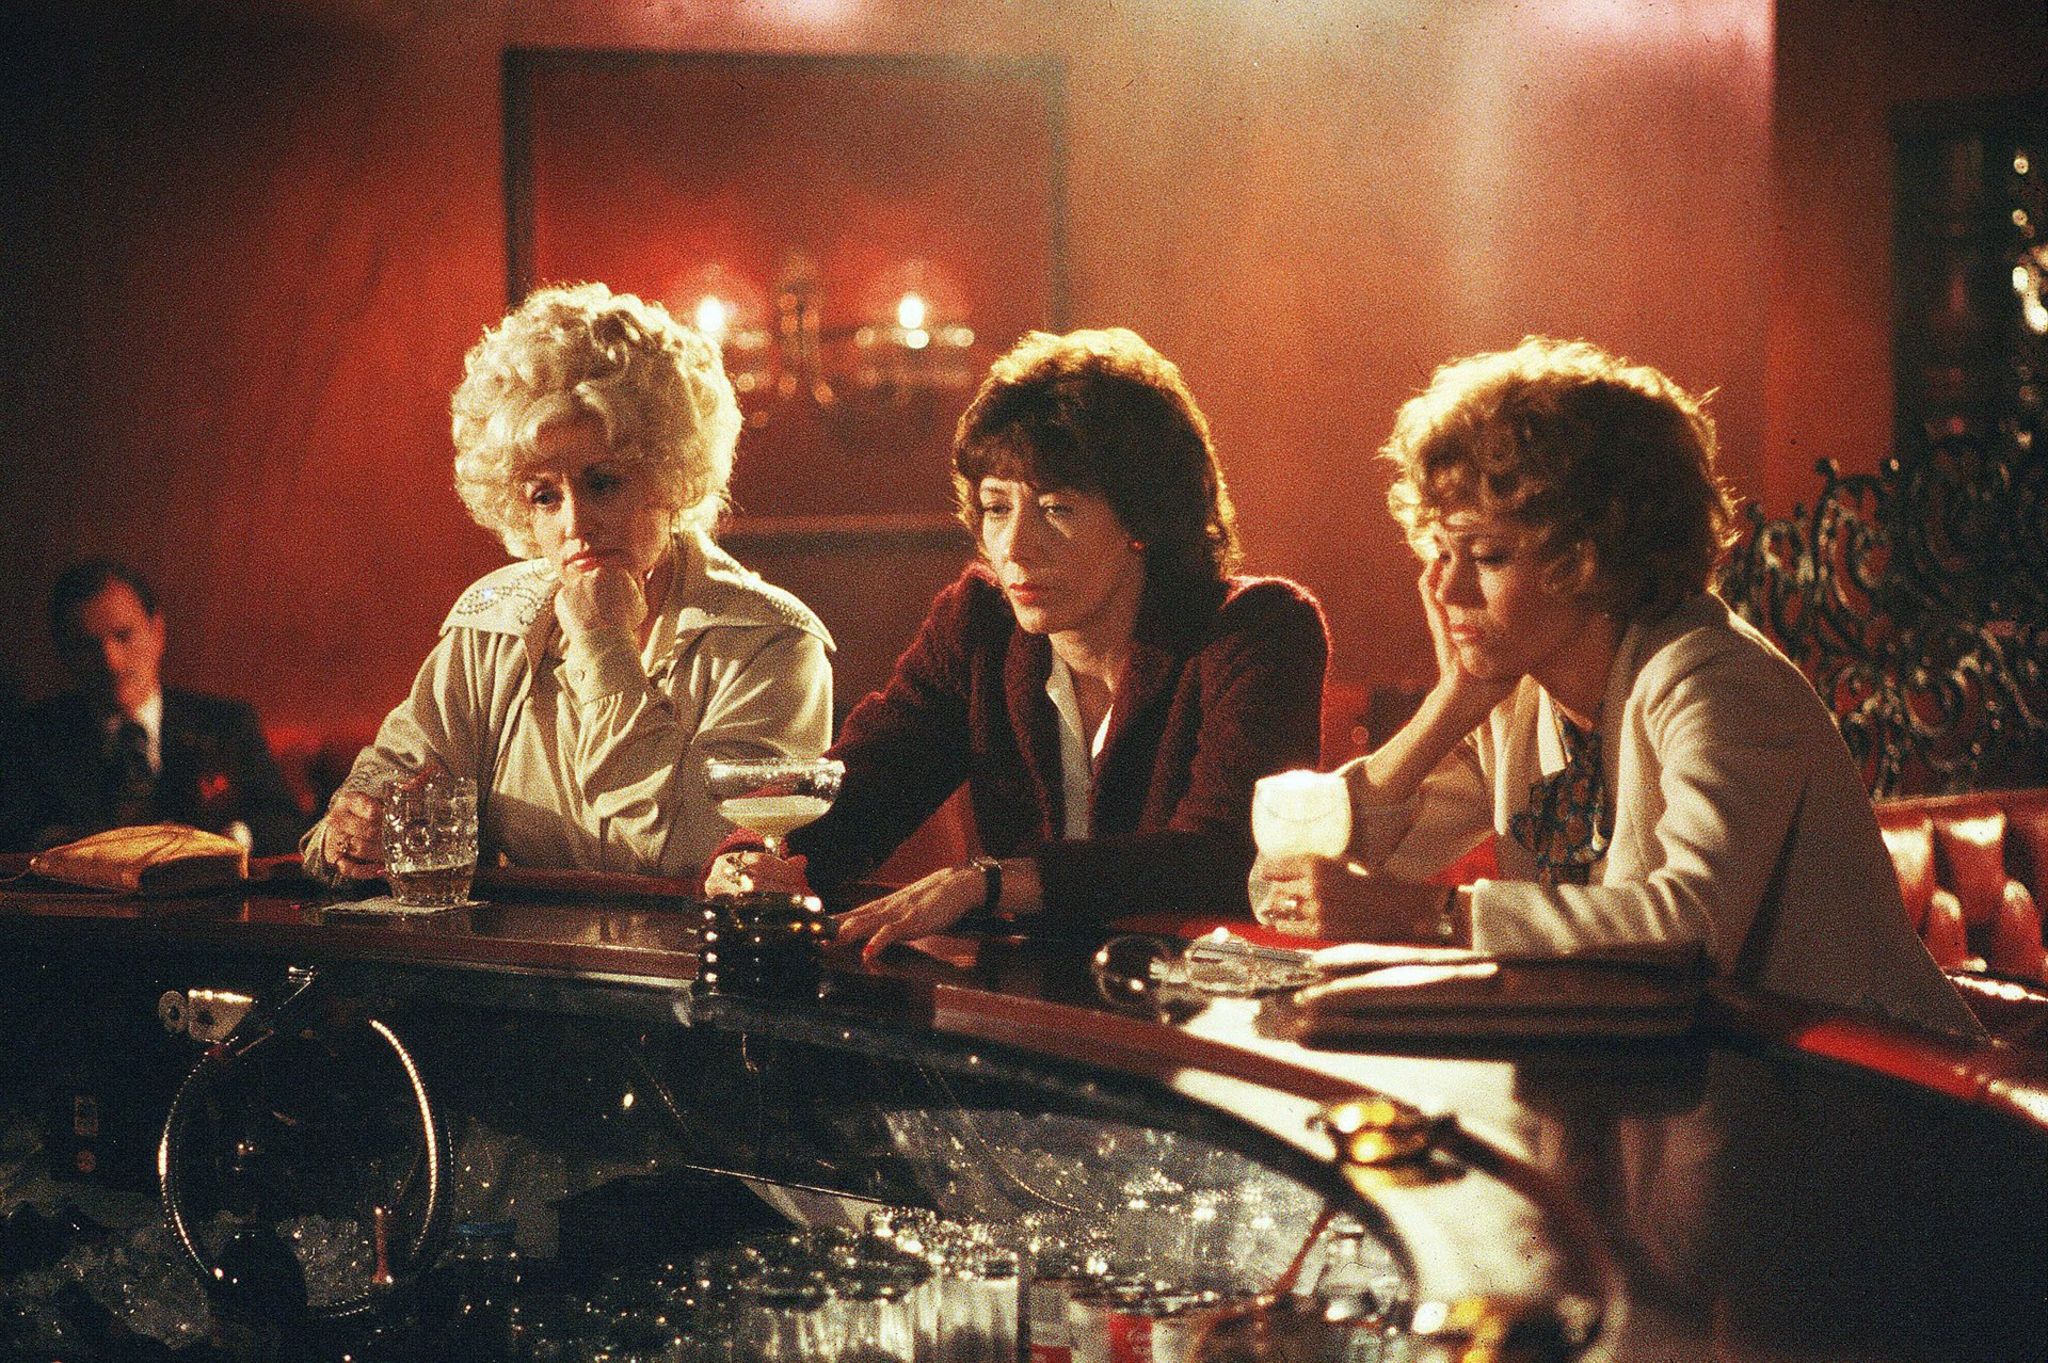 Dolly Parton, Lily Tomlin and Jane Fonda drown their sorrows in a scene from 9 to 5